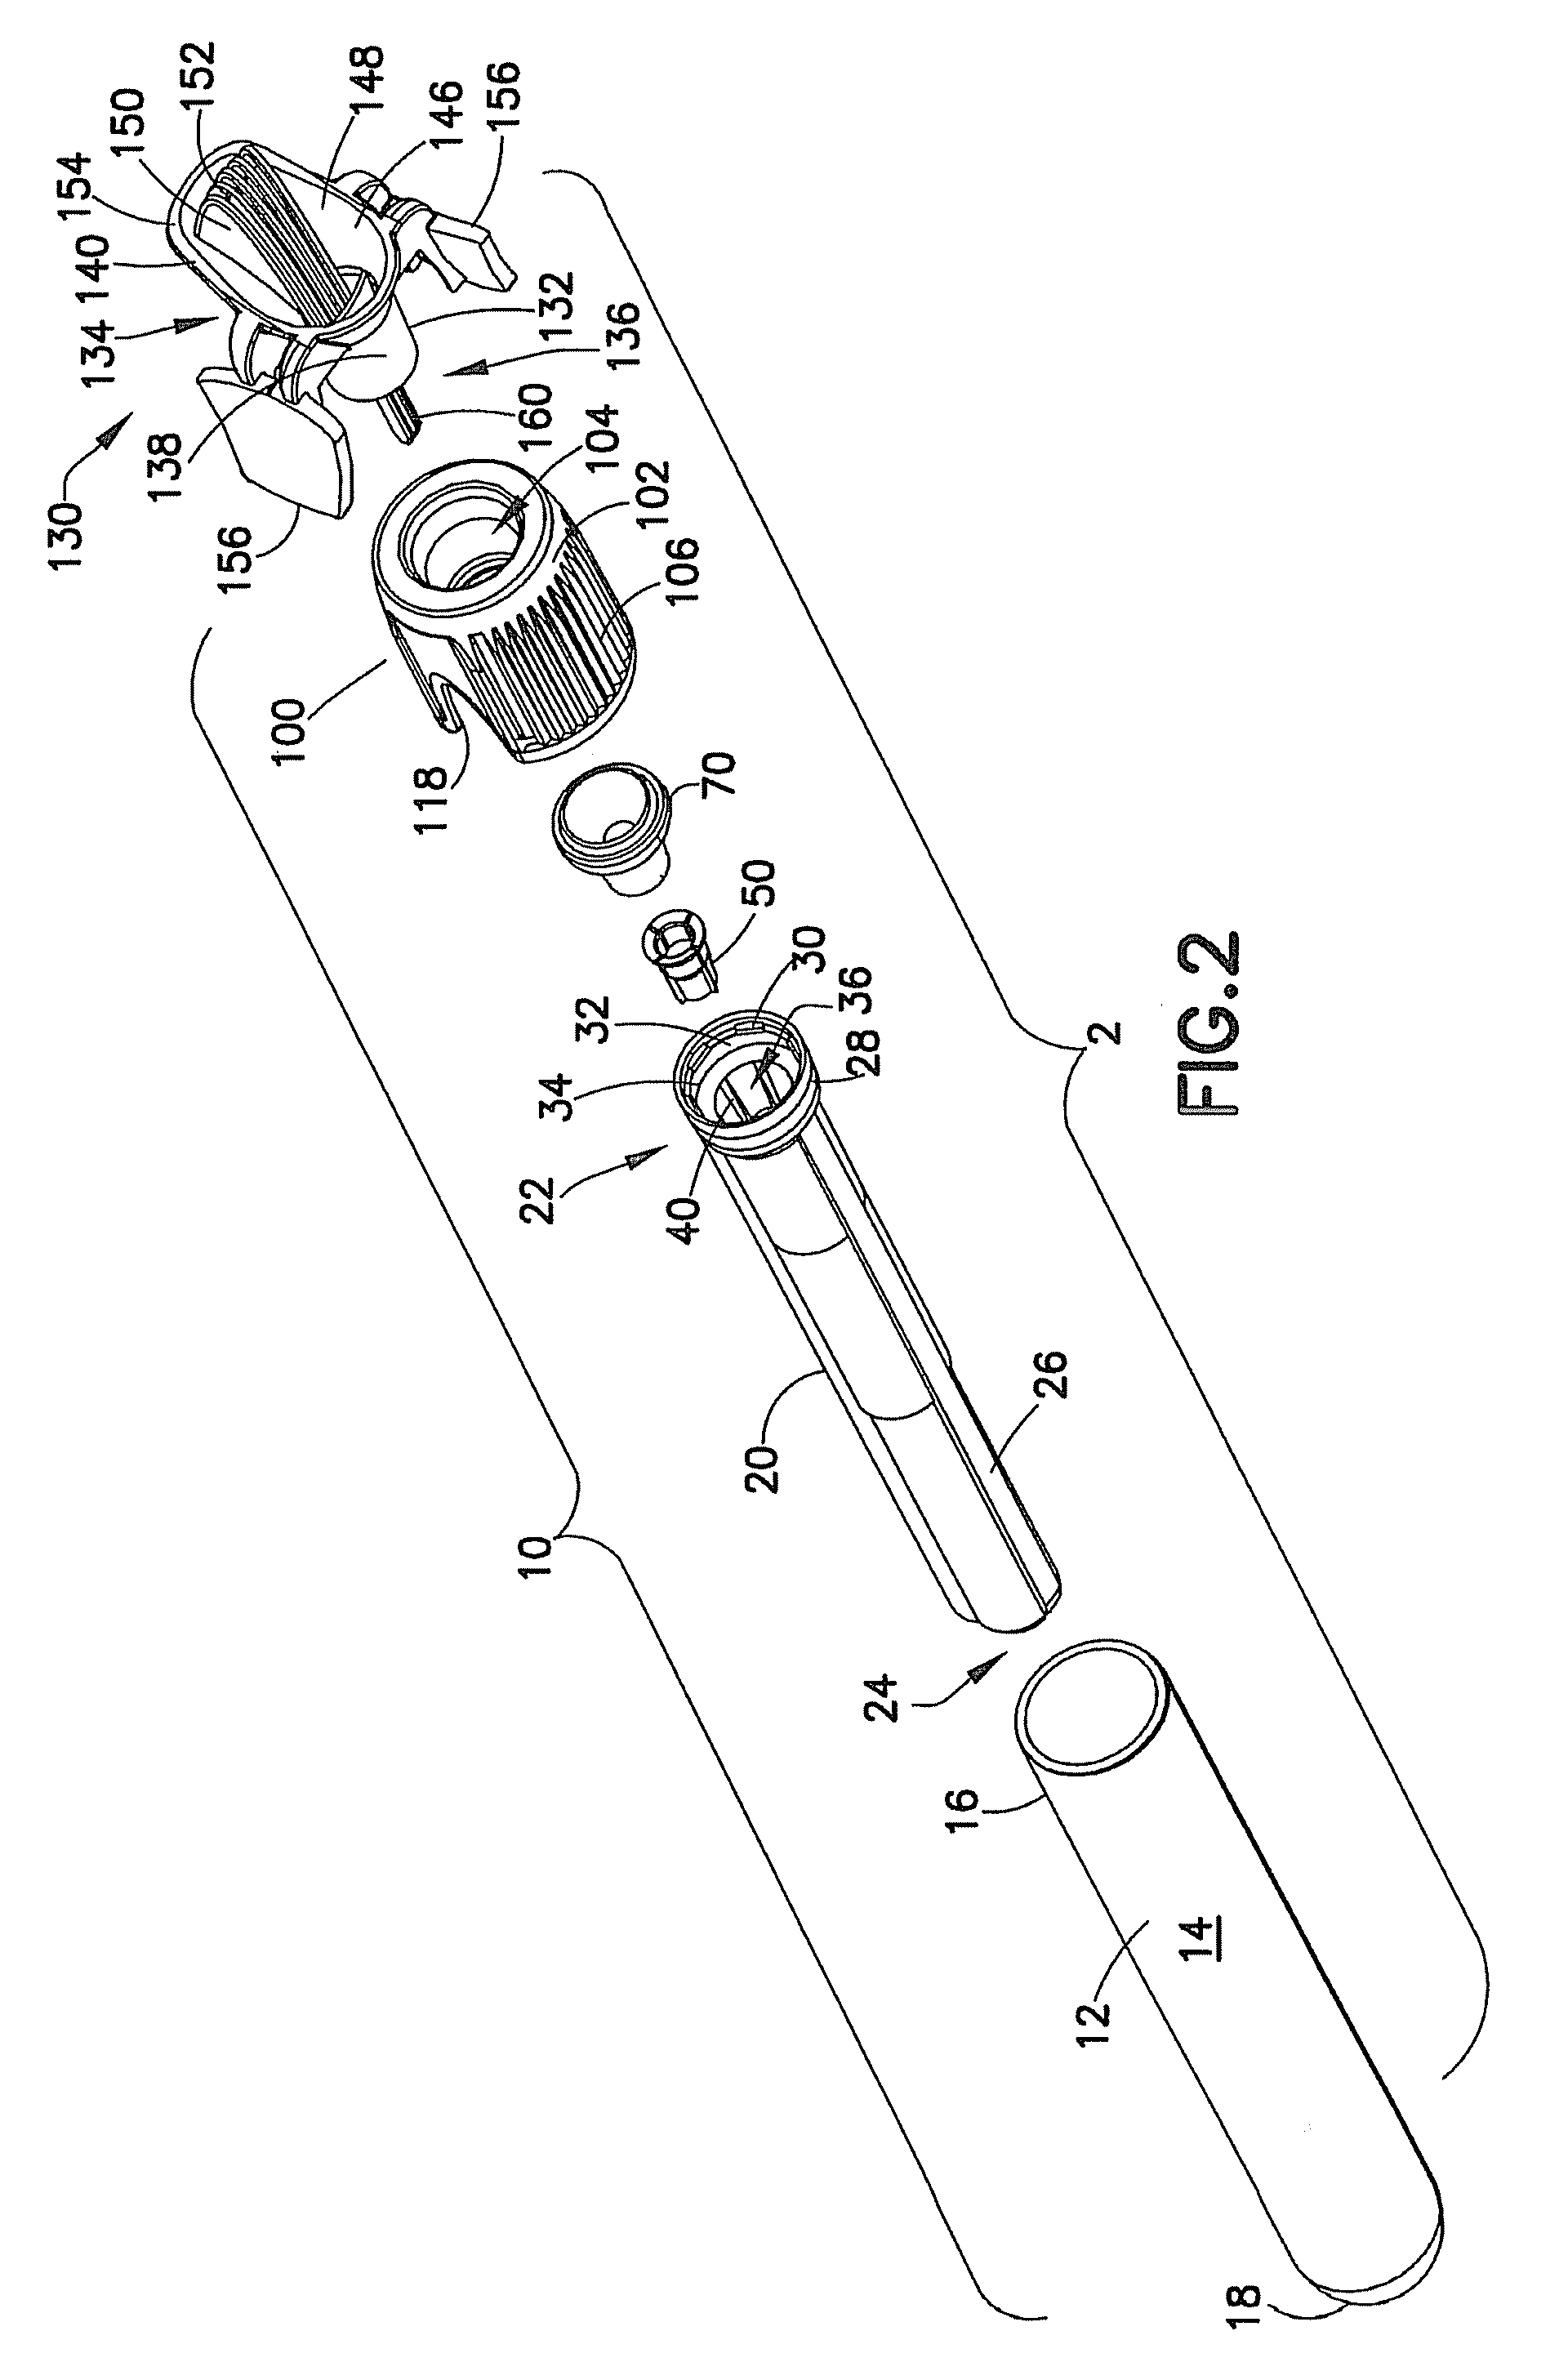 Capillary Action Collection Device and Container Assembly